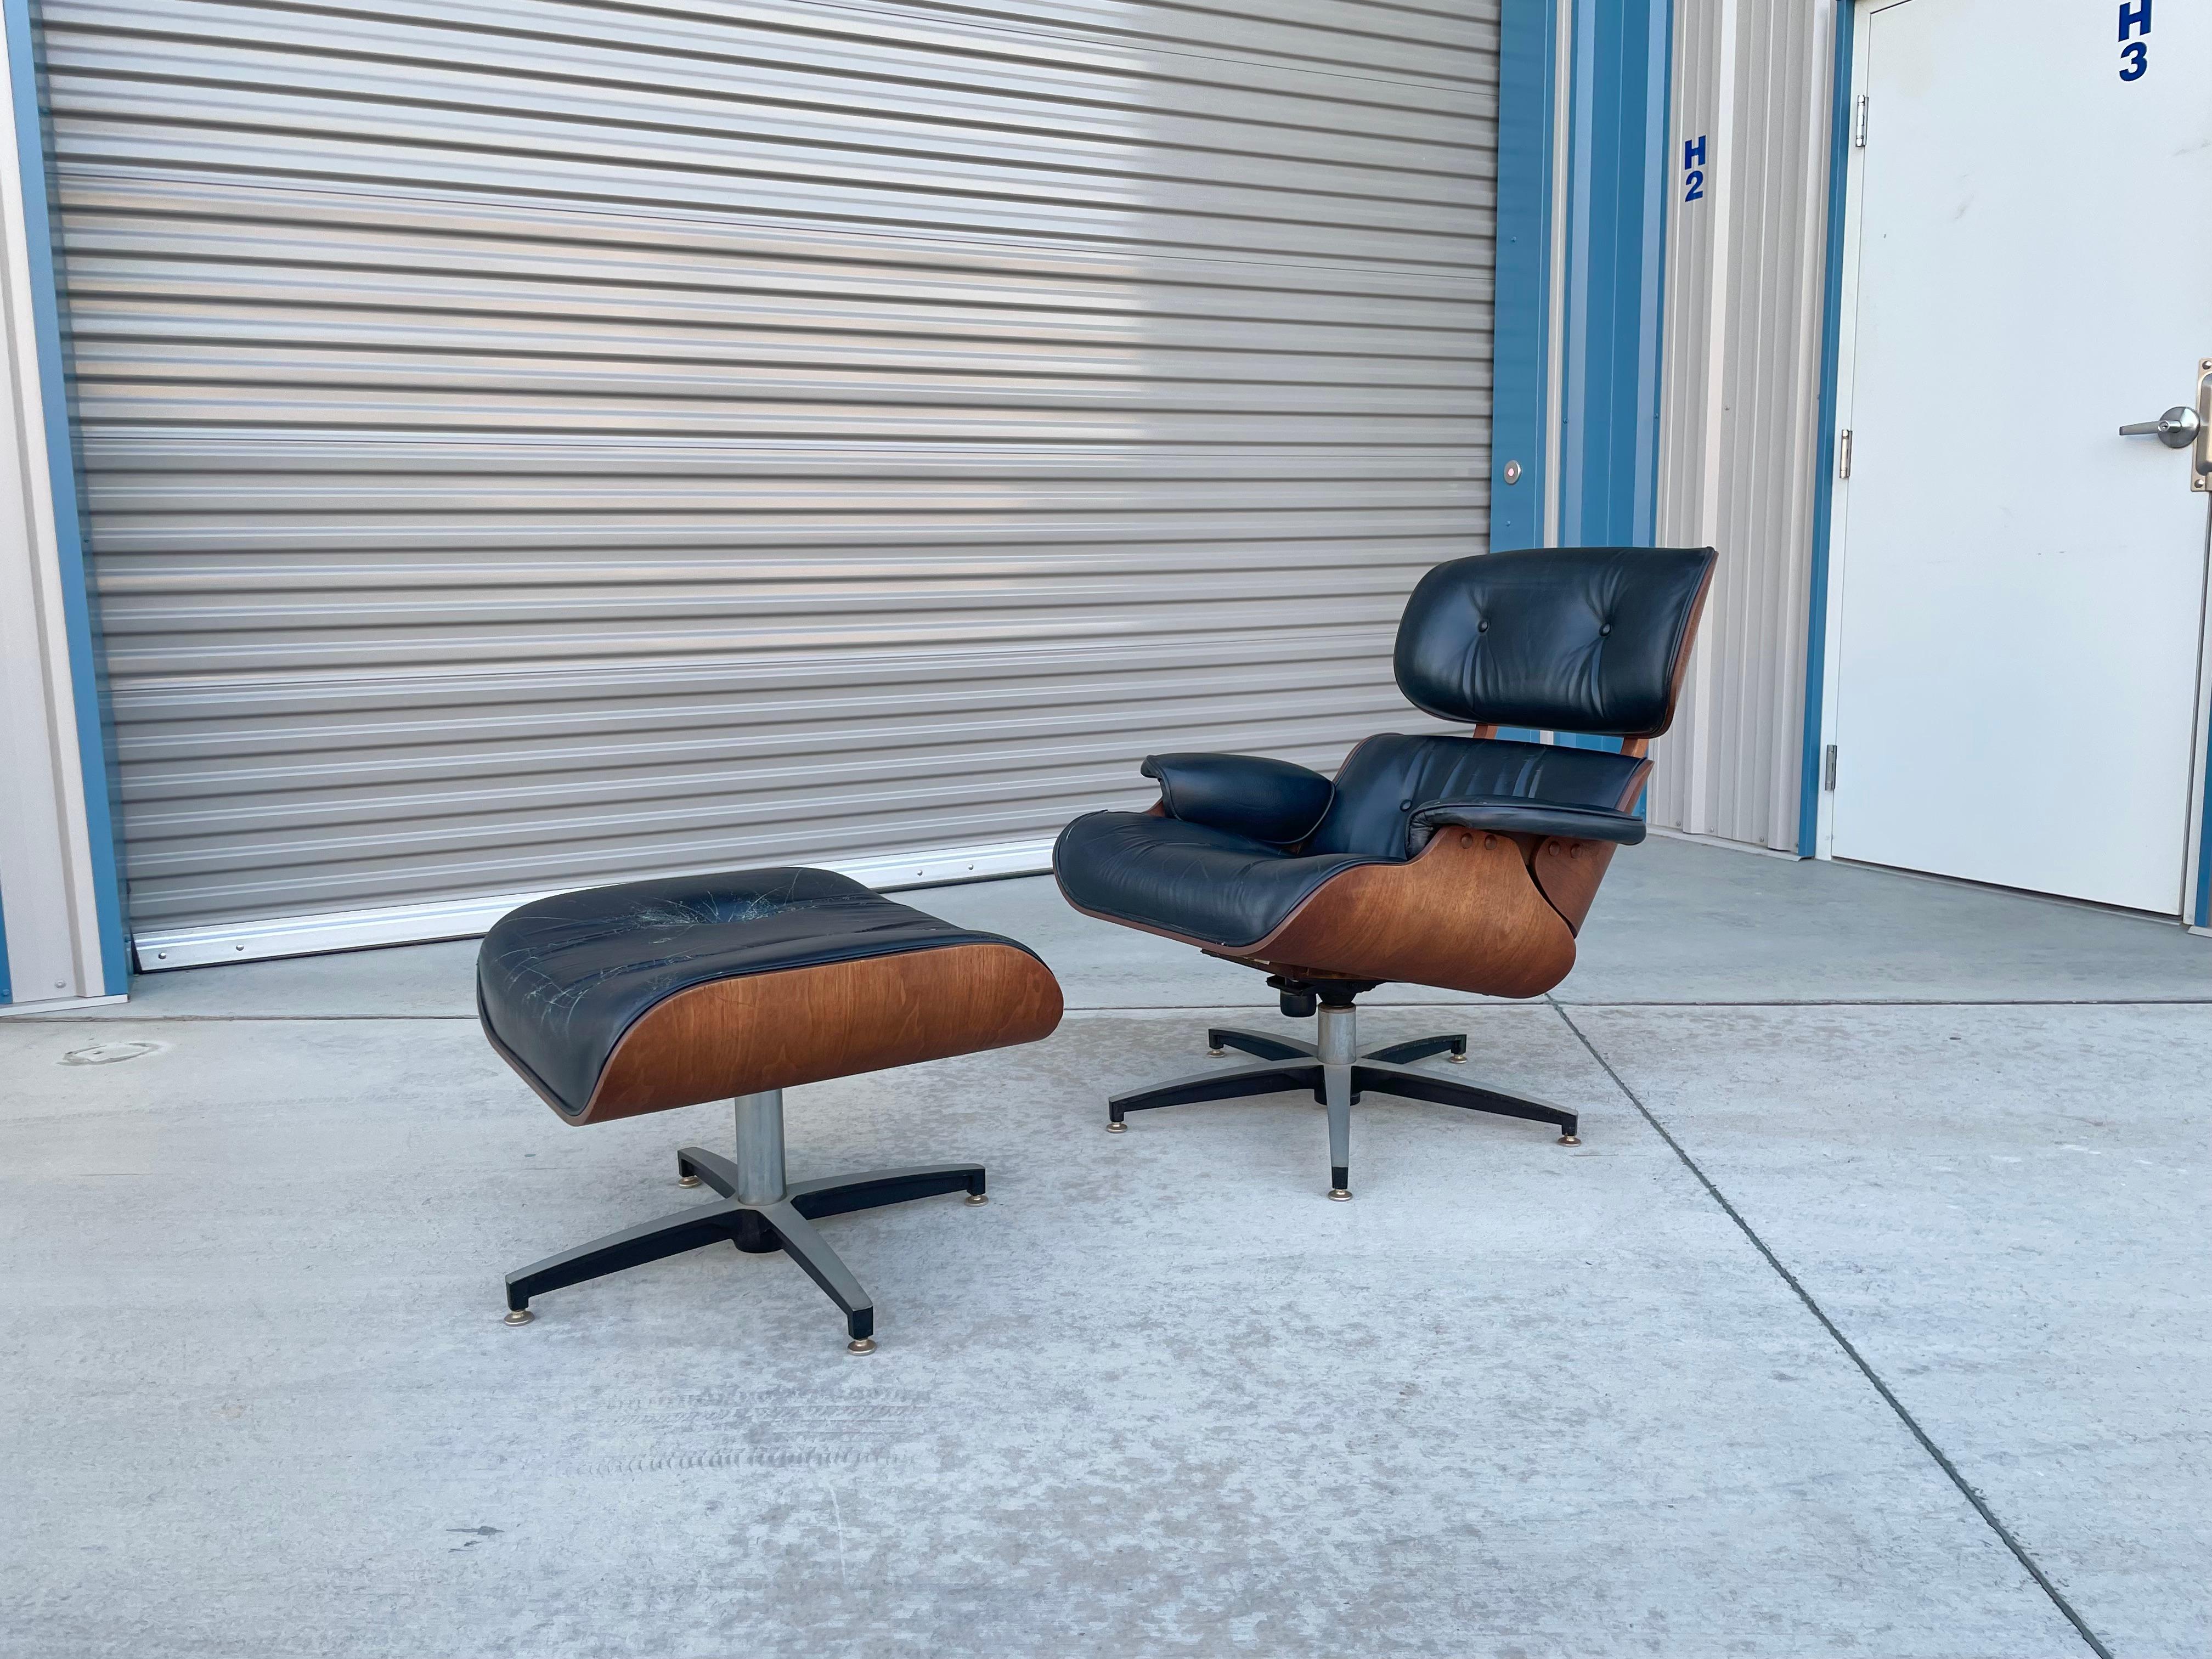 Mid-century chair and ottoman designed and manufactured in the United States circa 1960s. This beautiful chair and ottoman was styled after Herman Miller. This set features a walnut frame with a black leather upholstery, a classic piece that would